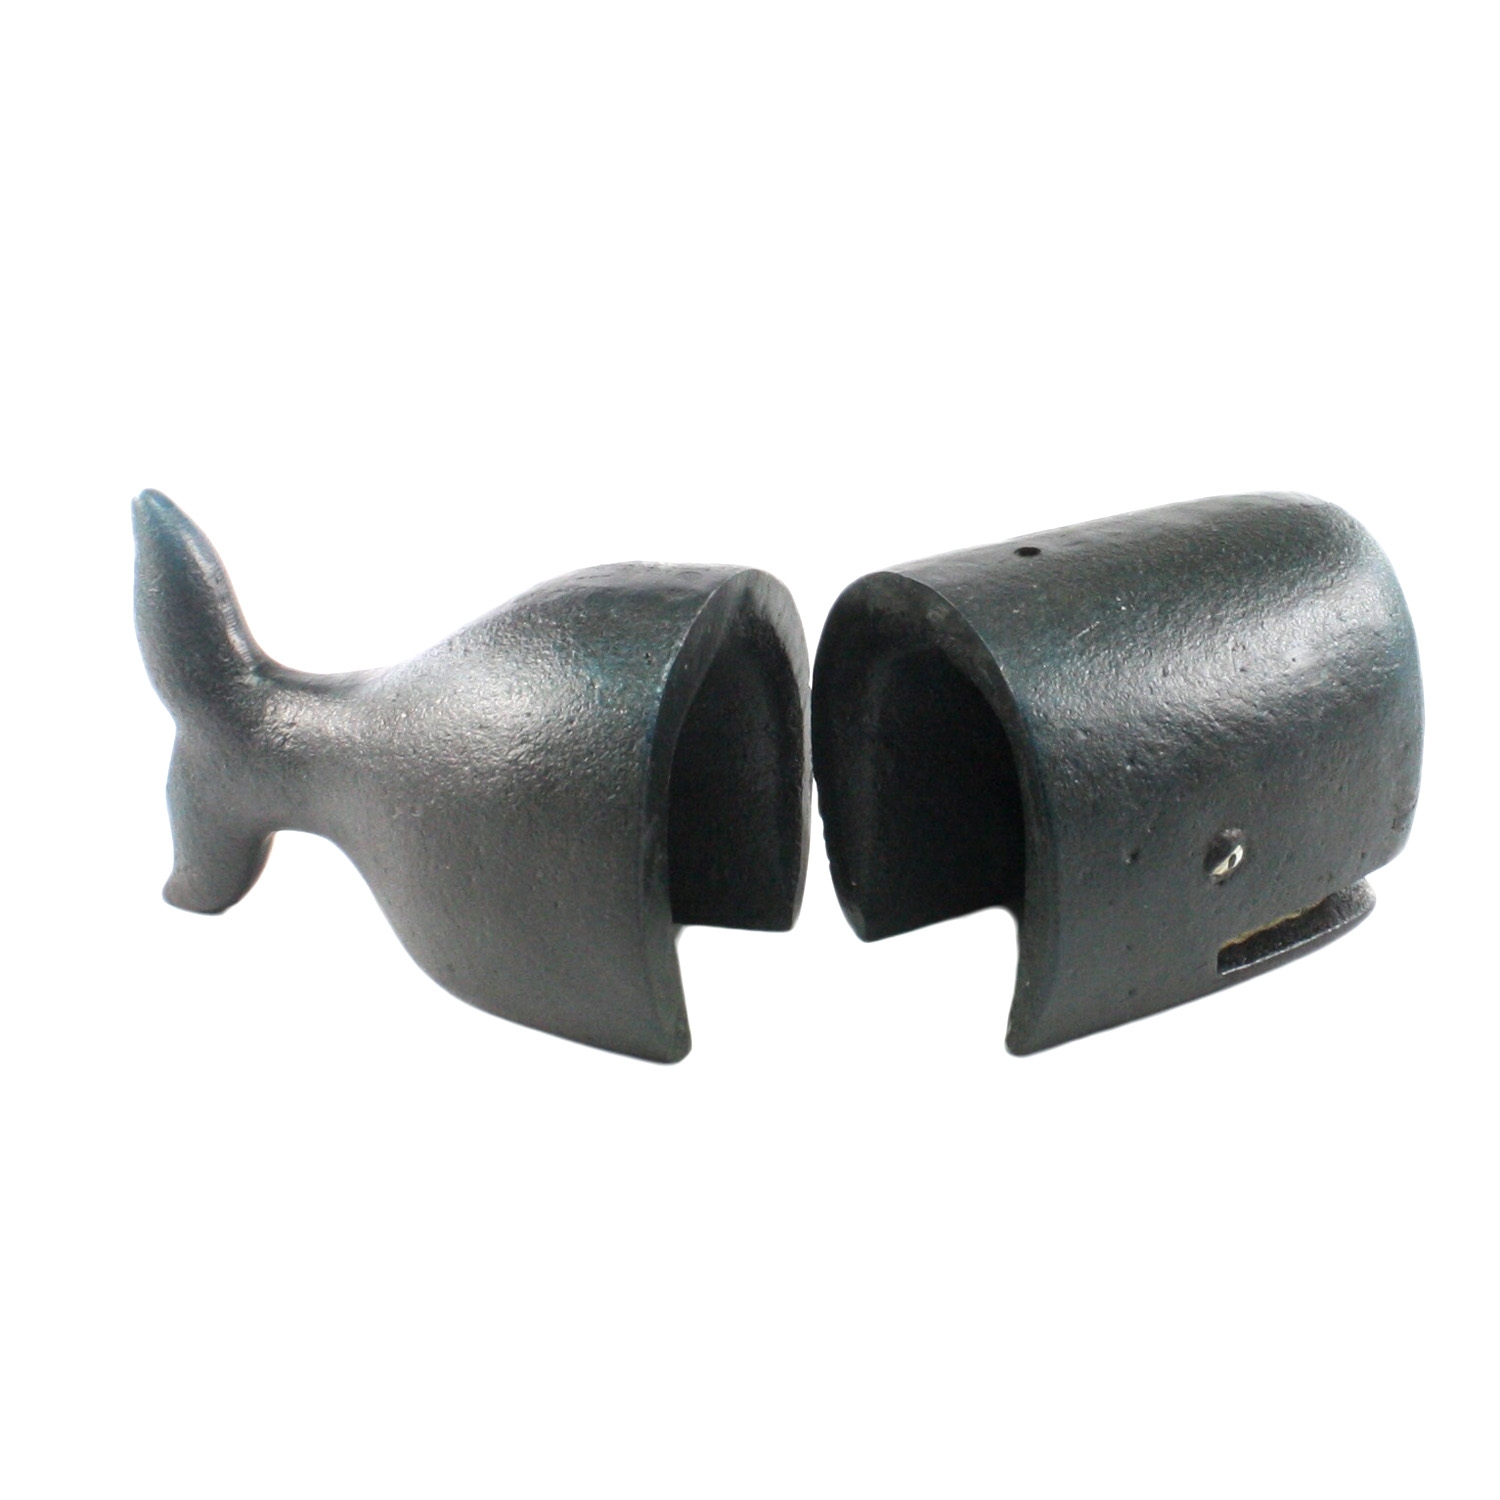 Cast Iron Whale Bookends by HomArt